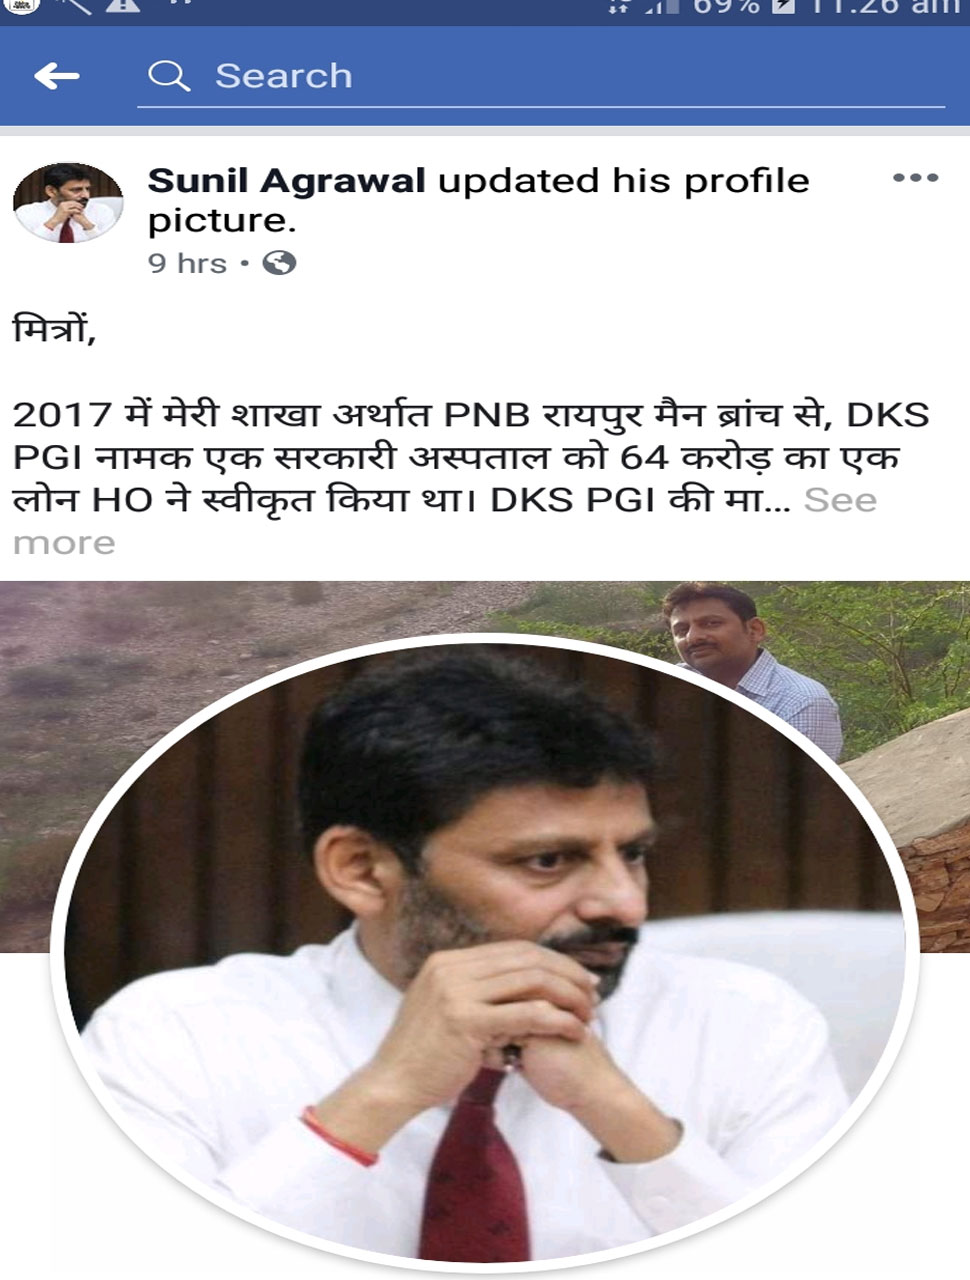 DKS Scam: PNB&#039;s AGM Sunil Agarwal made a big disclosure on Facebook, post removed after police interference